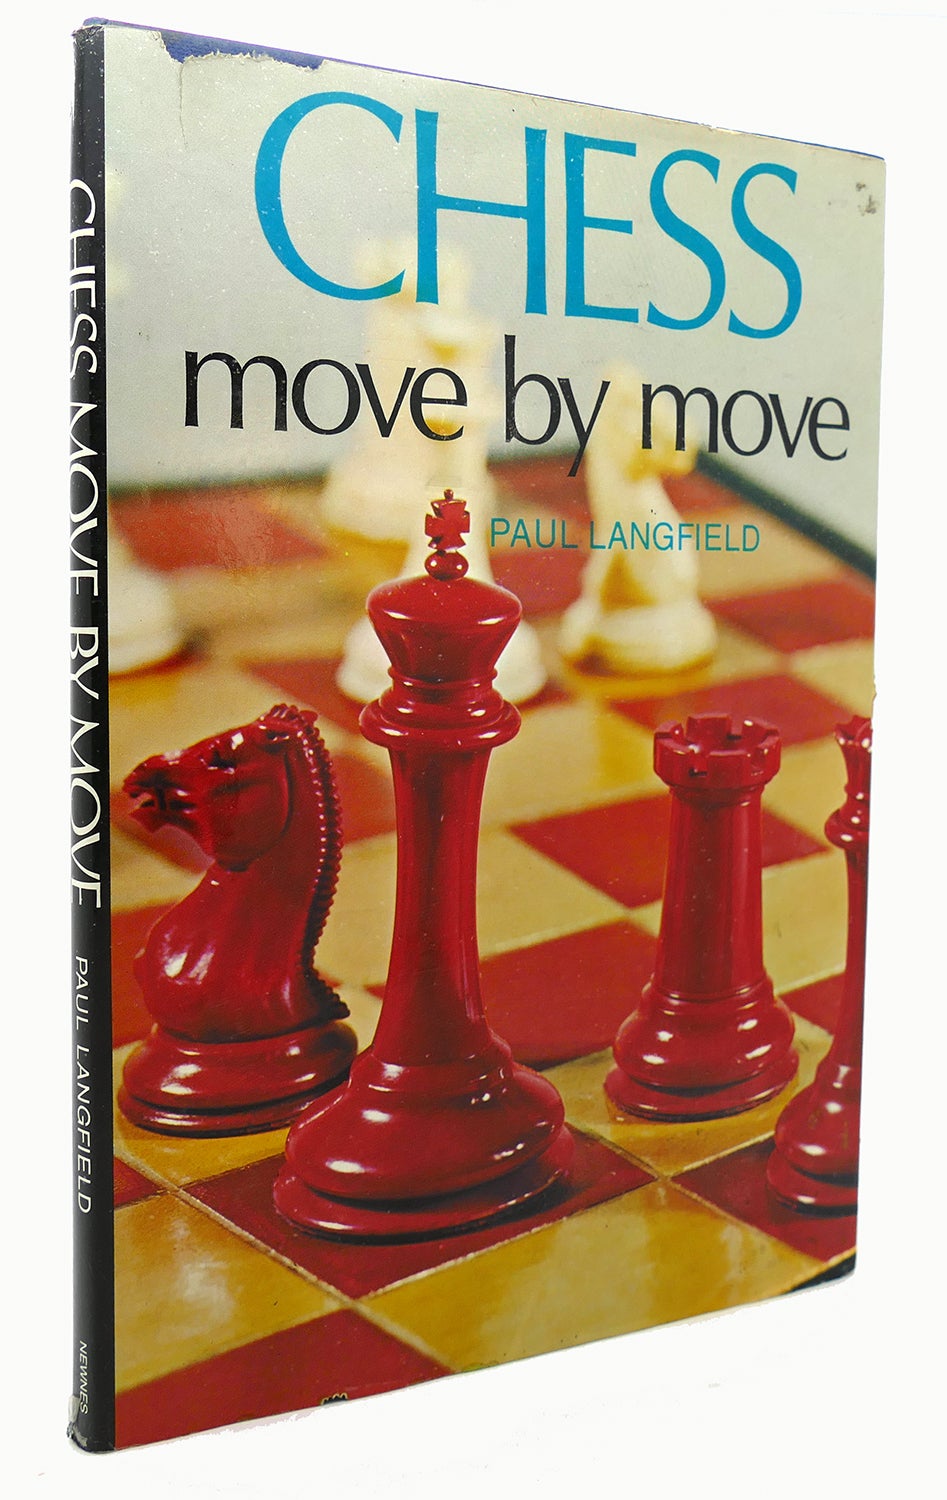 What Is A Book Move In Chess? 